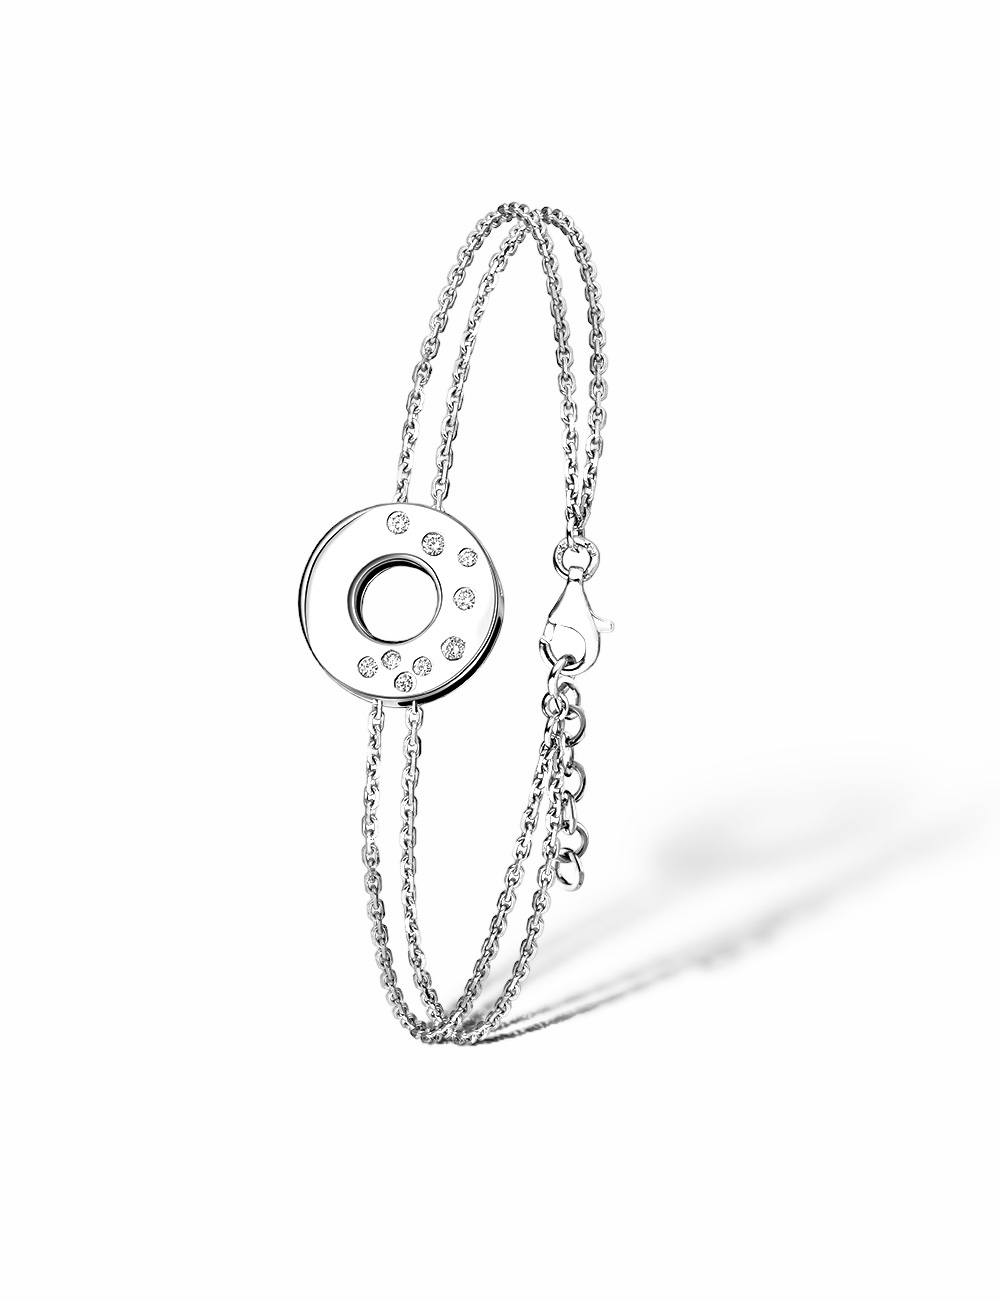 A women's bracelet in white gold, shaped into a circle and adorned with a cascade of white diamonds